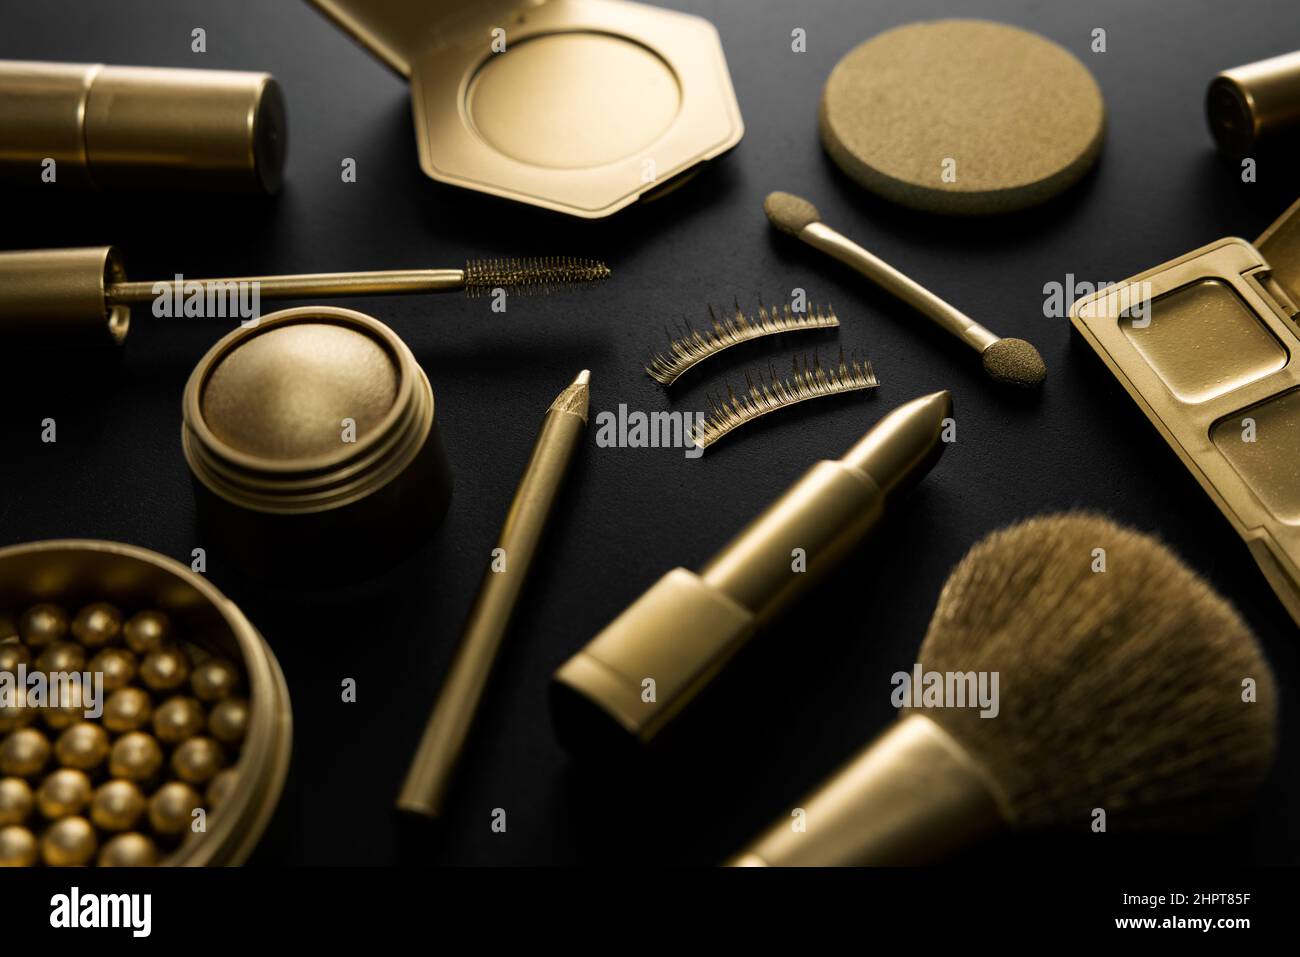 golden decorative makeup cosmetics on black table. luxury beauty products concept Stock Photo